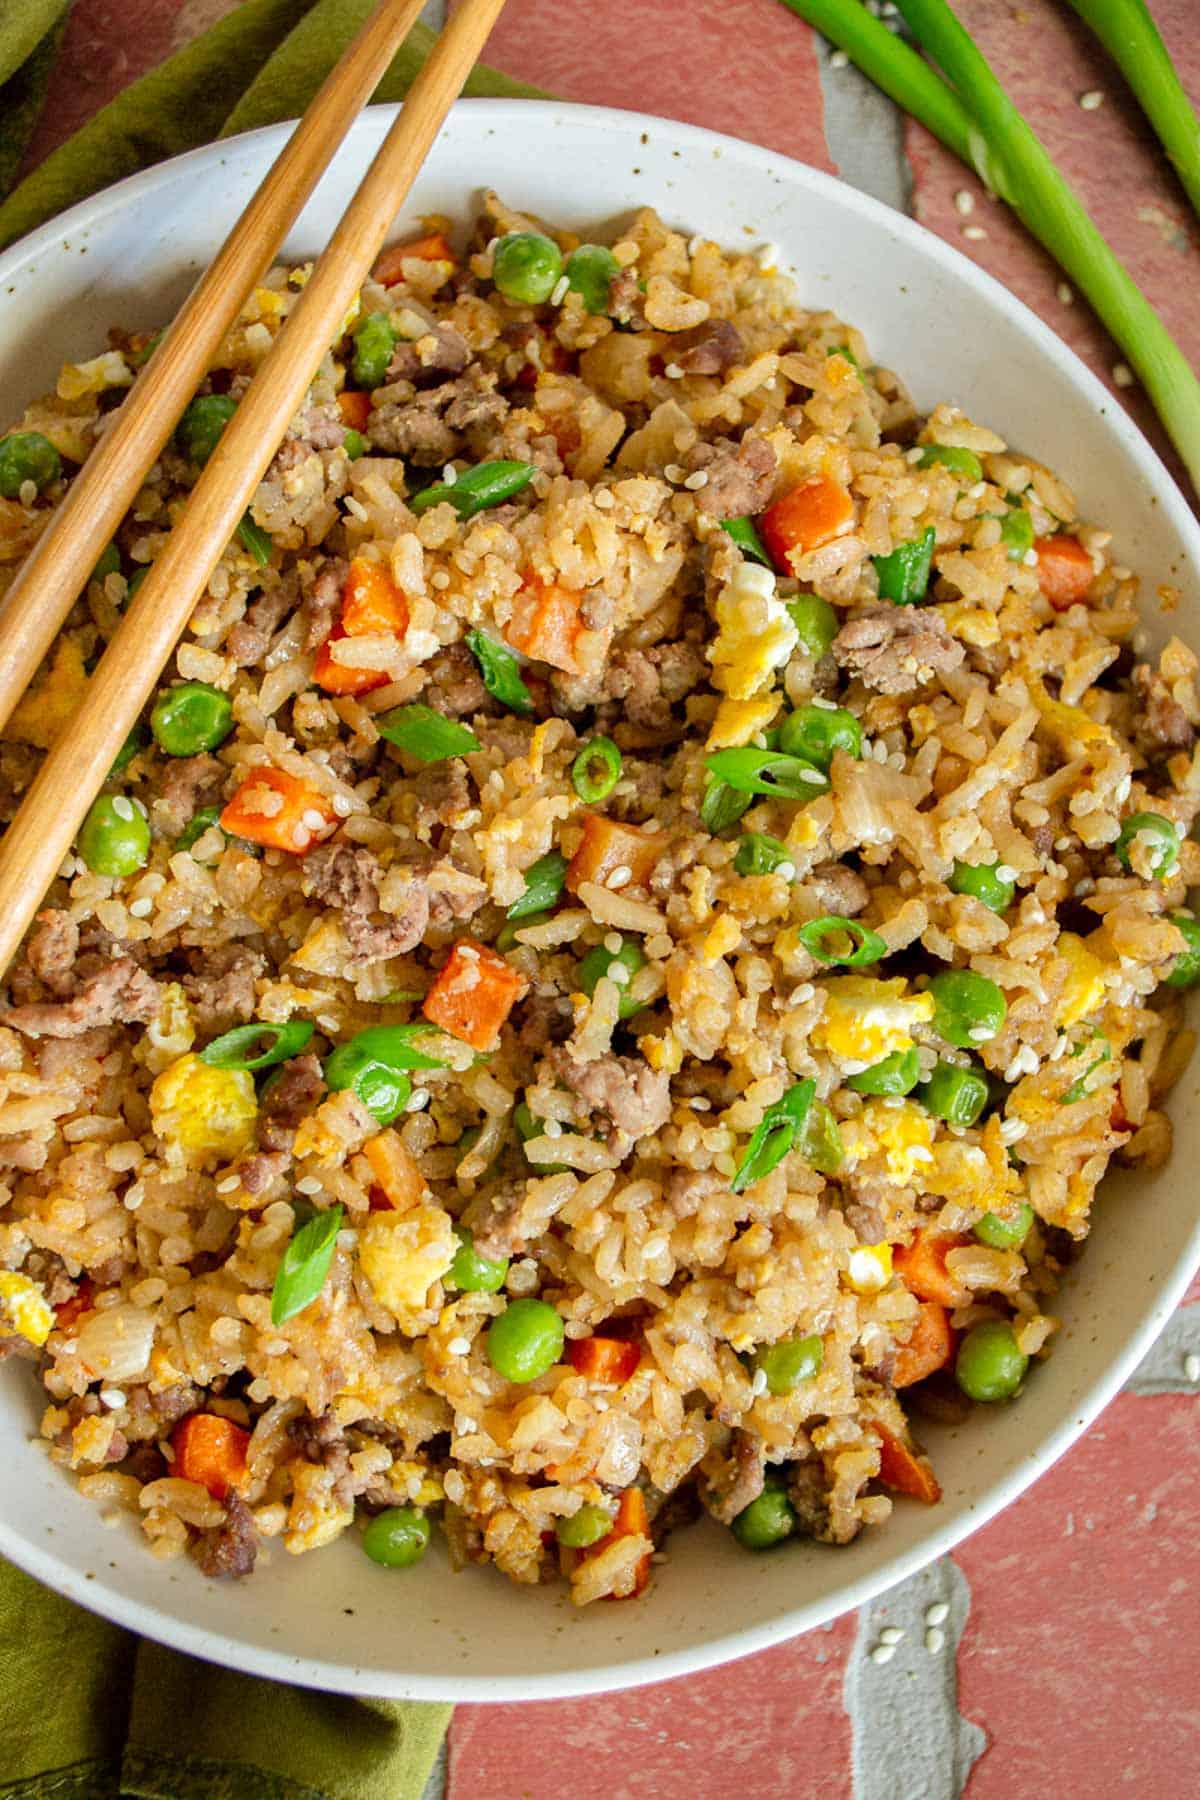 Bowl of ground beef fried rice on a brick background.